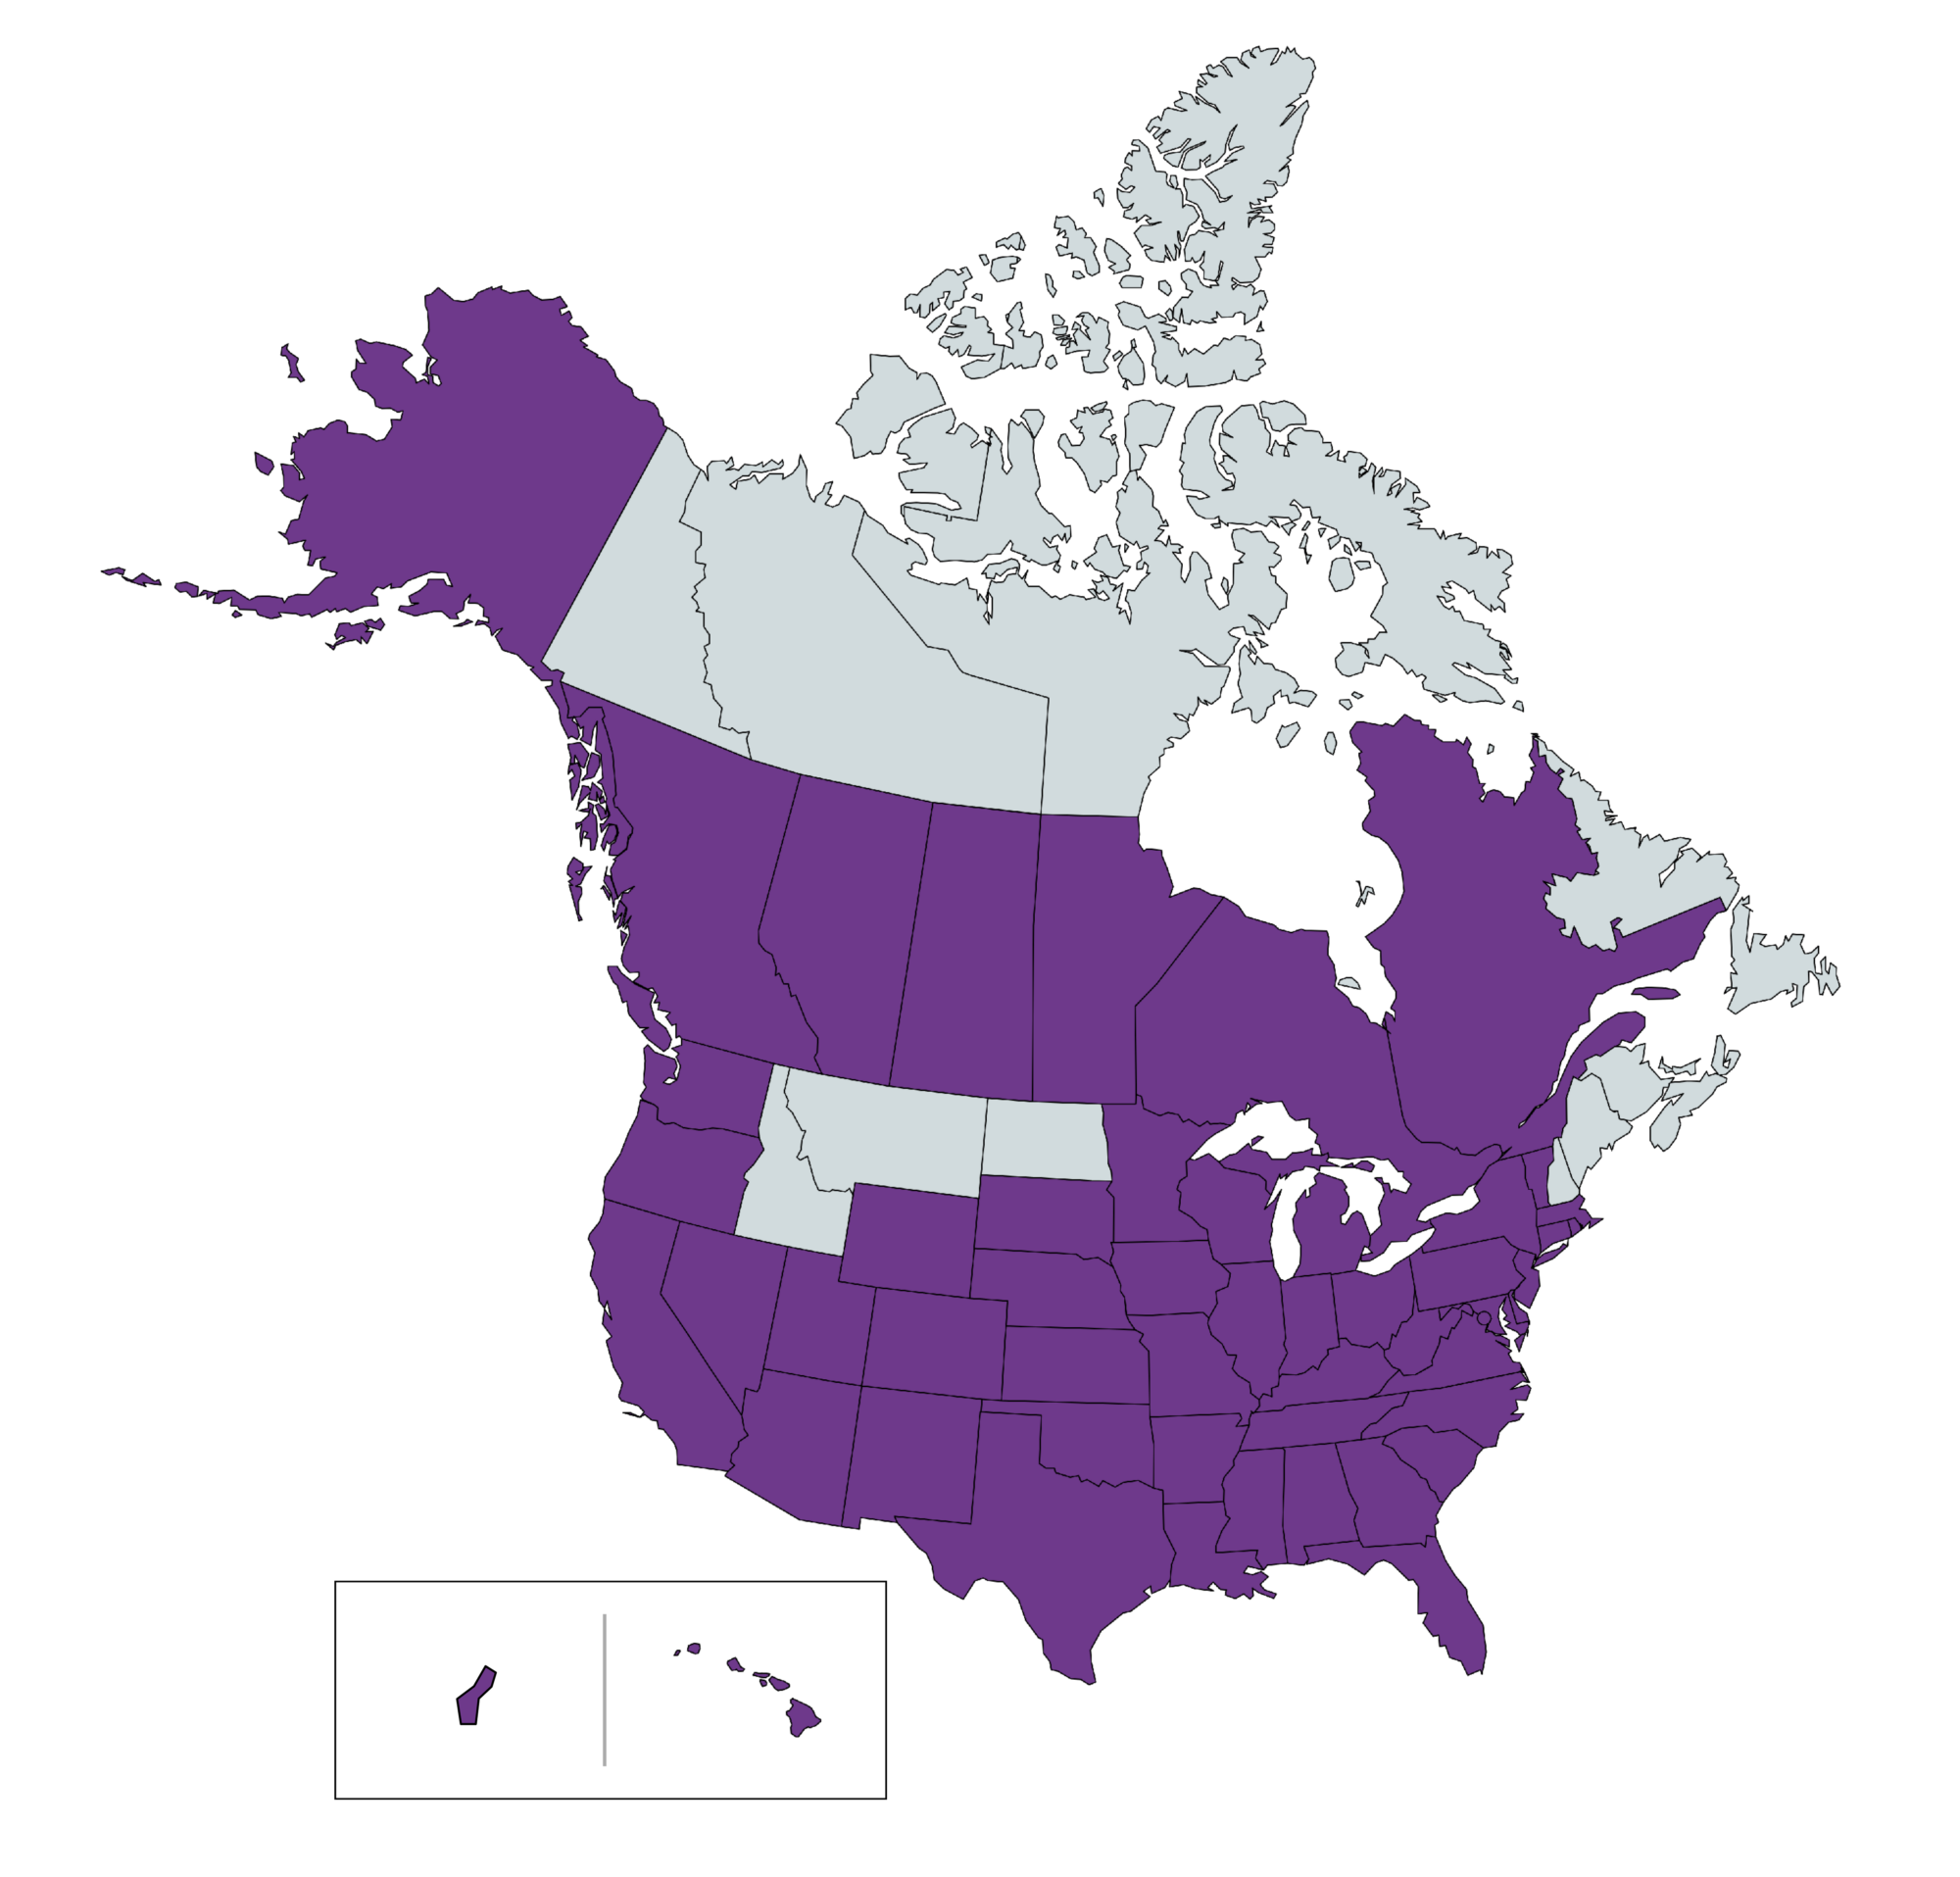 North American continent map with US states/territories and Canadian provinces represented by AUPresses members highlighted in purple (with Hawaii and Guam inset)